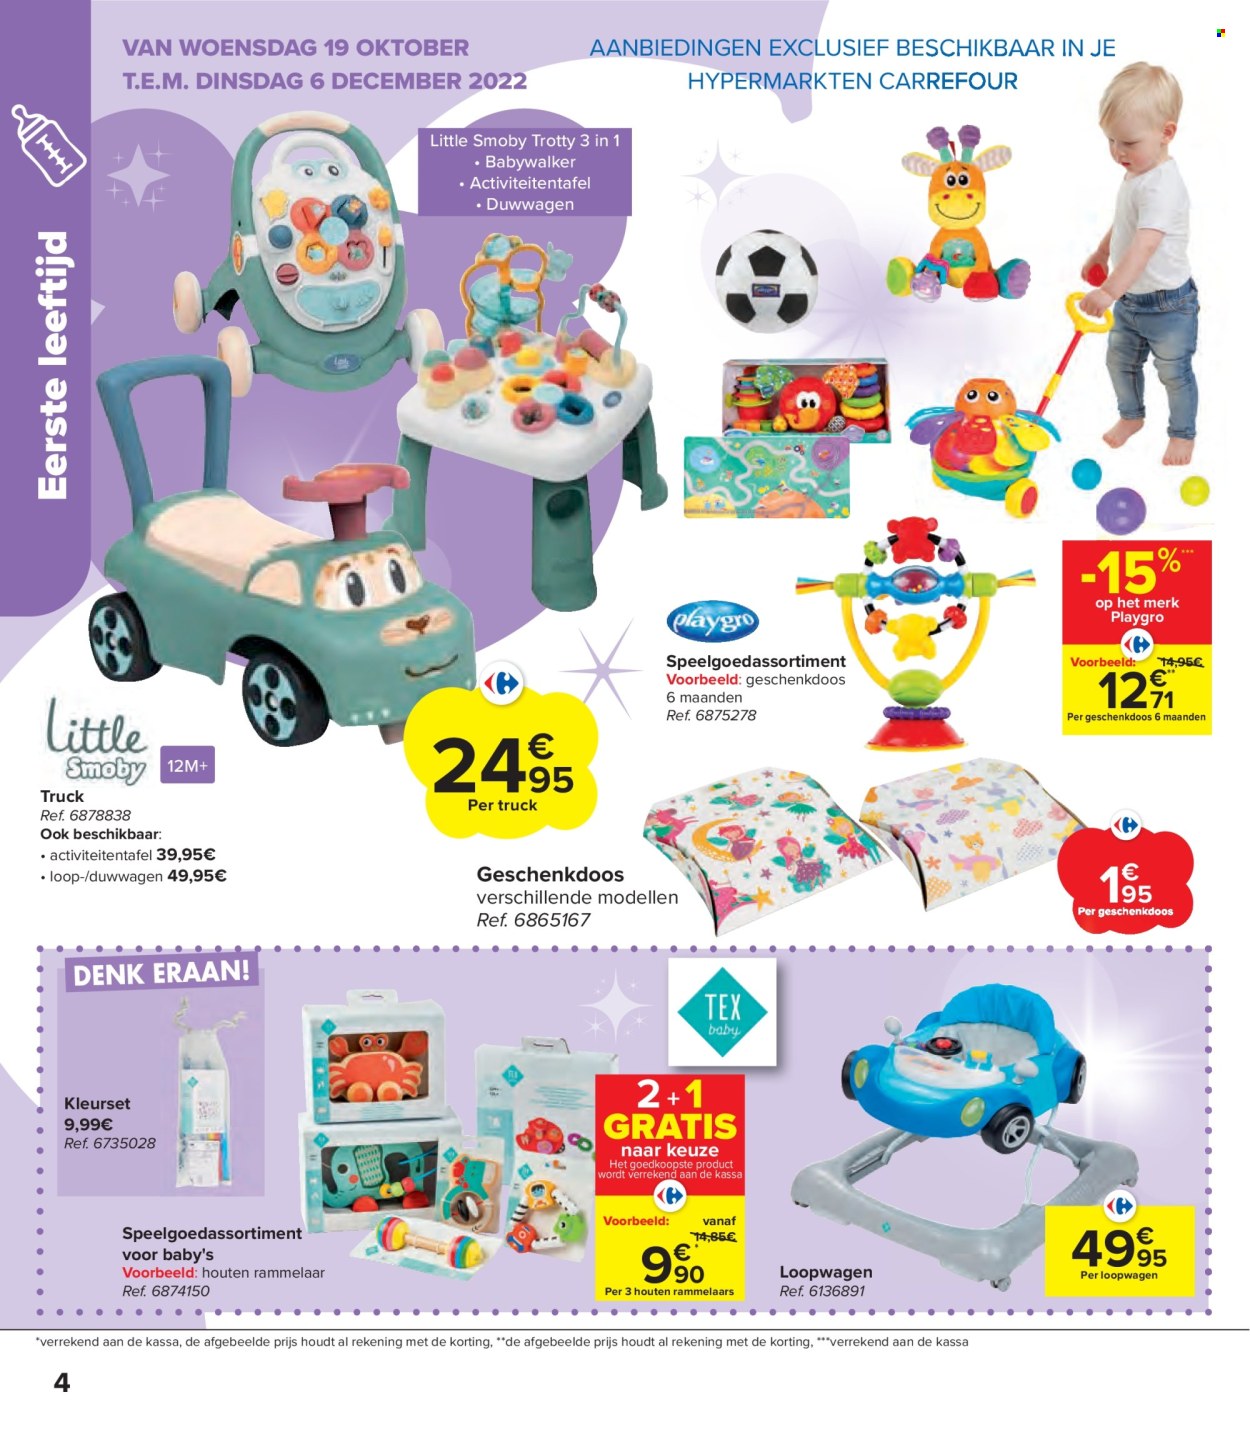 Catalogue Carrefour hypermarkt - 19.10.2022 - 6.12.2022. Page 4.